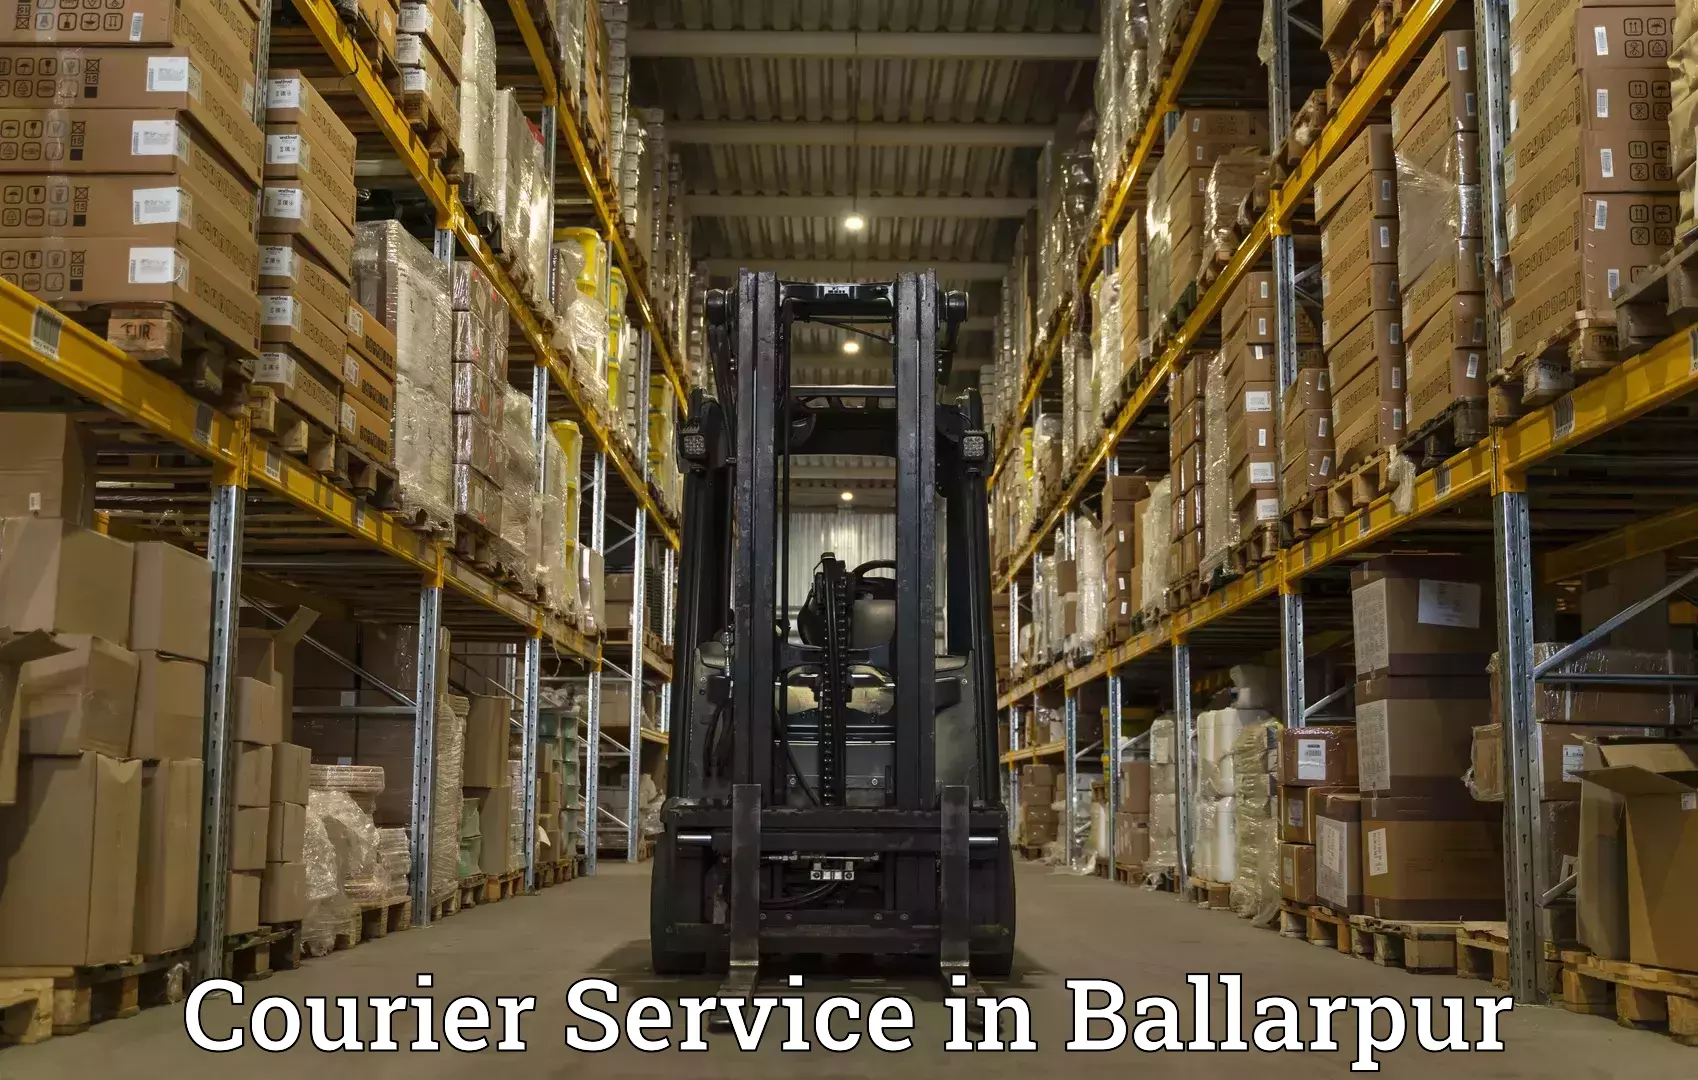 Business delivery service in Ballarpur